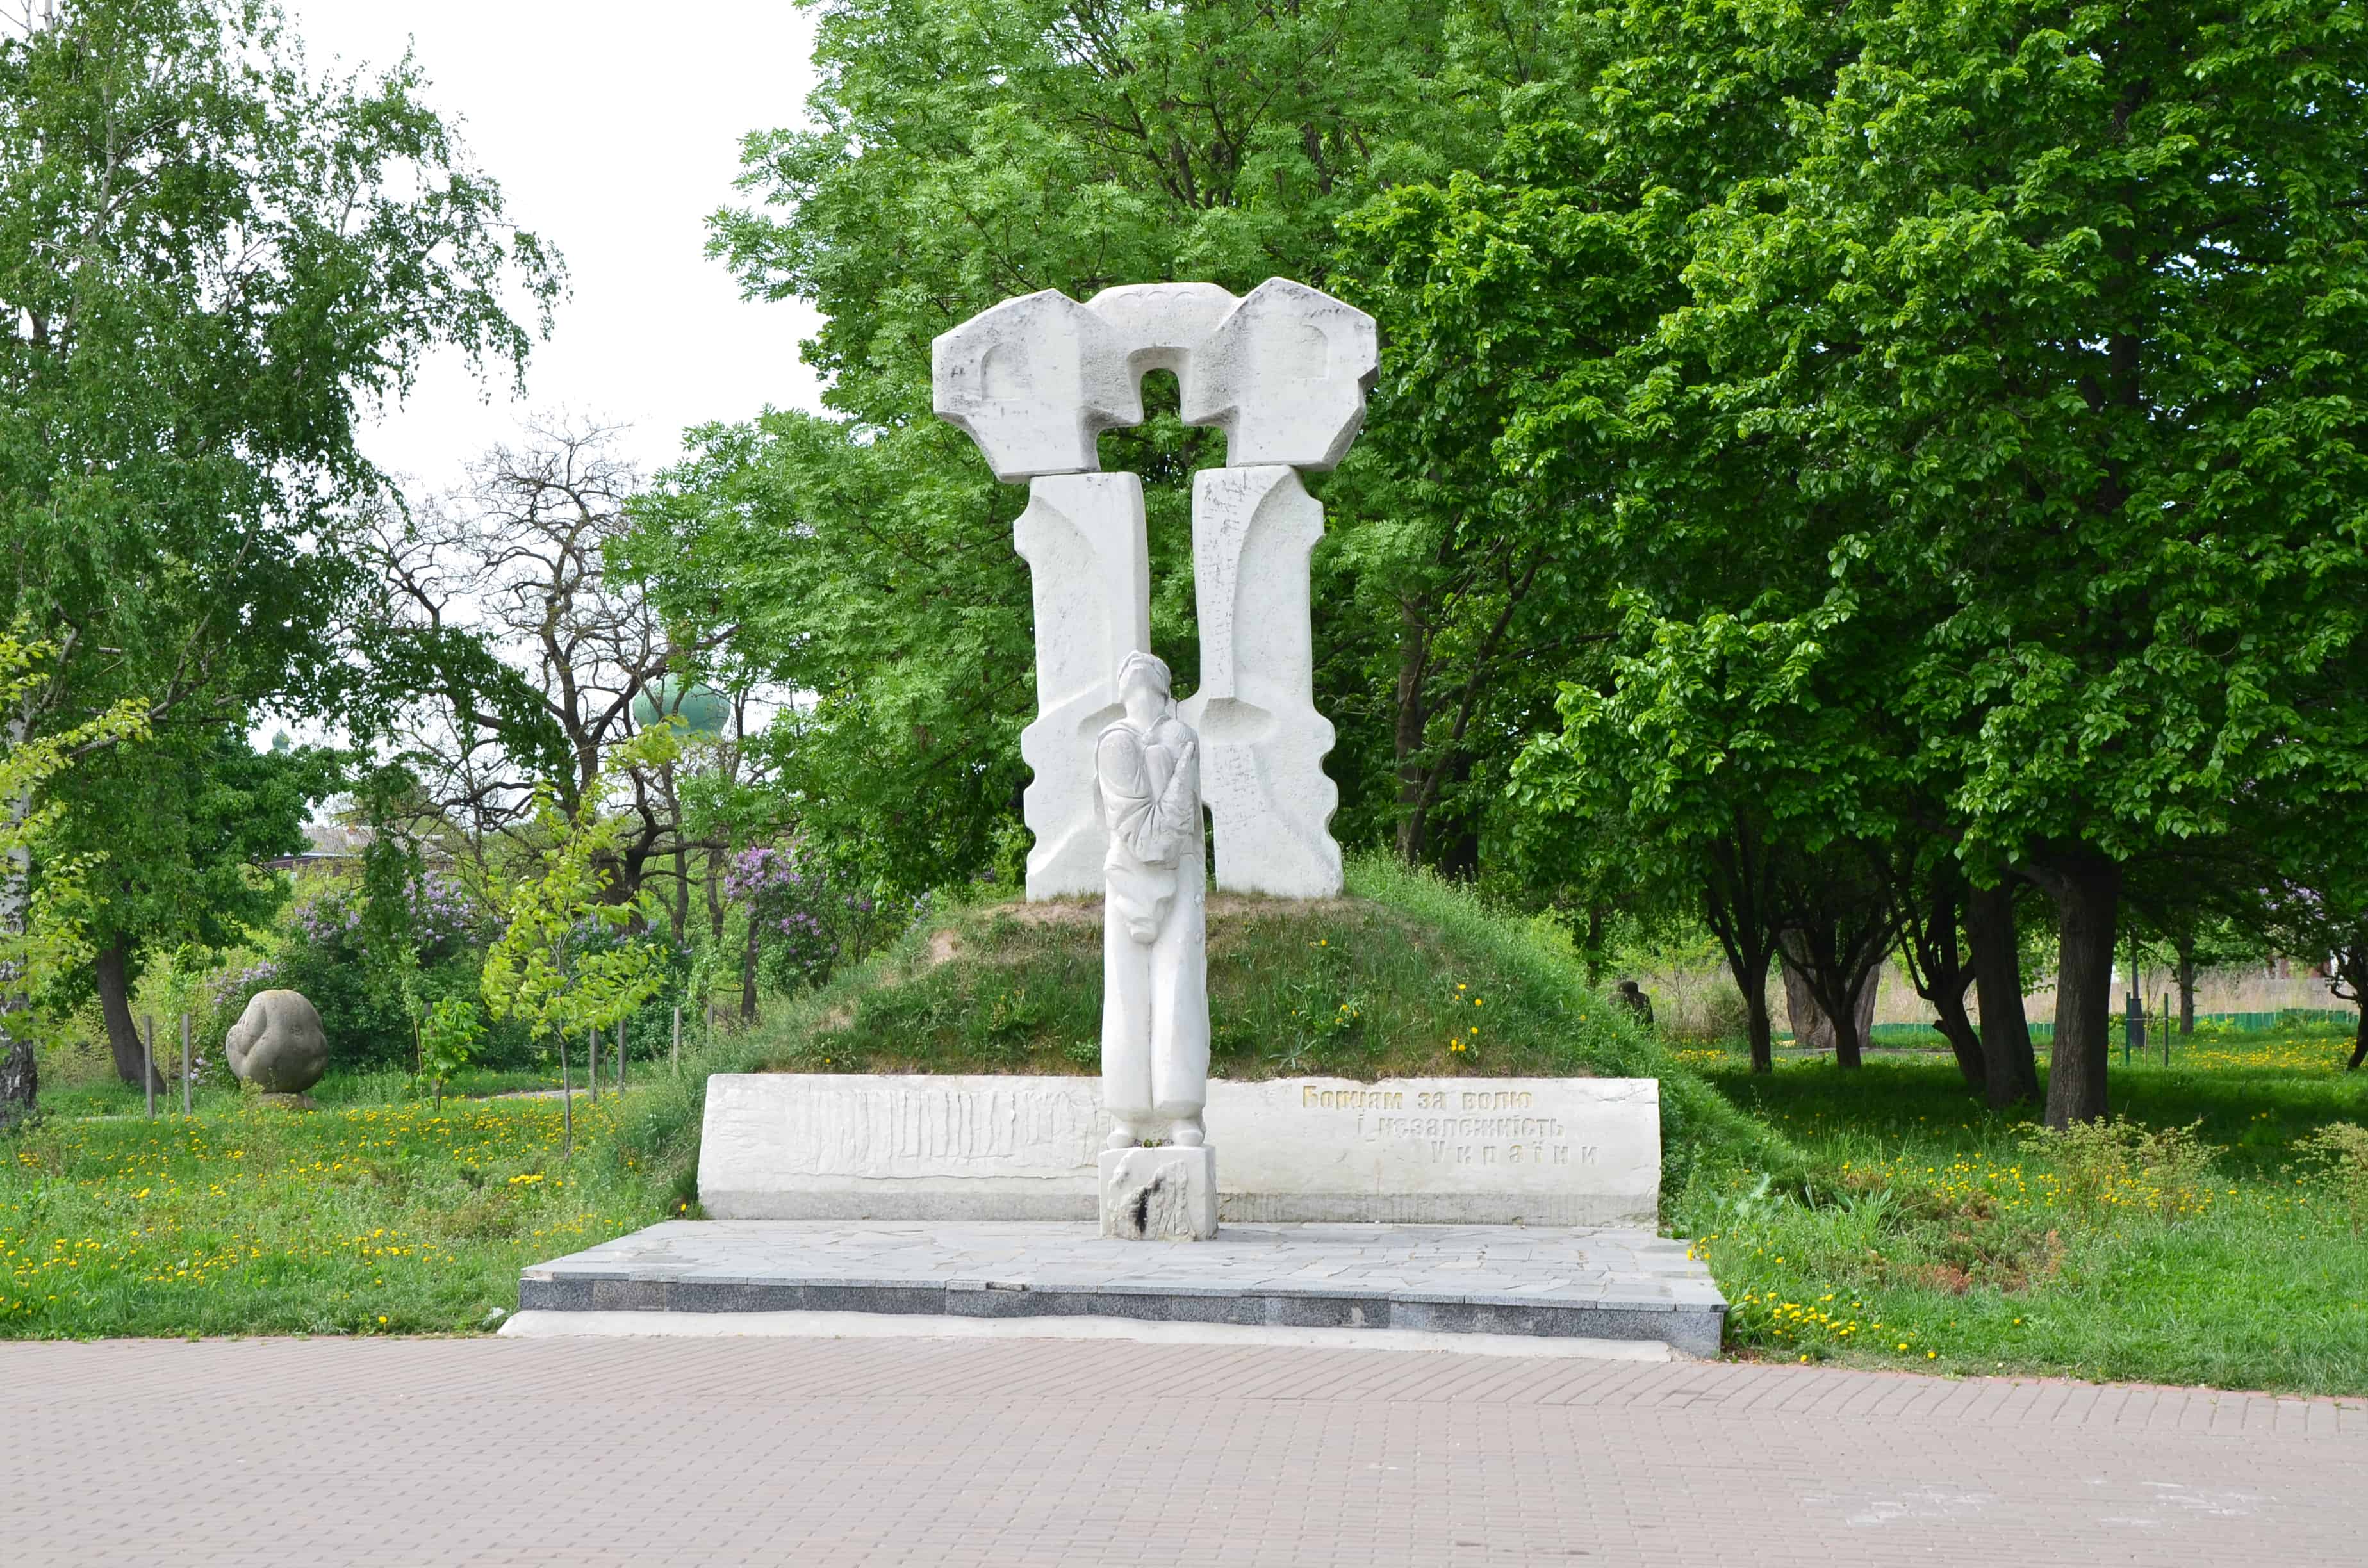 Monument to the Fighters for Freedom and Independence of the Ukraine in Chernihiv, Ukraine